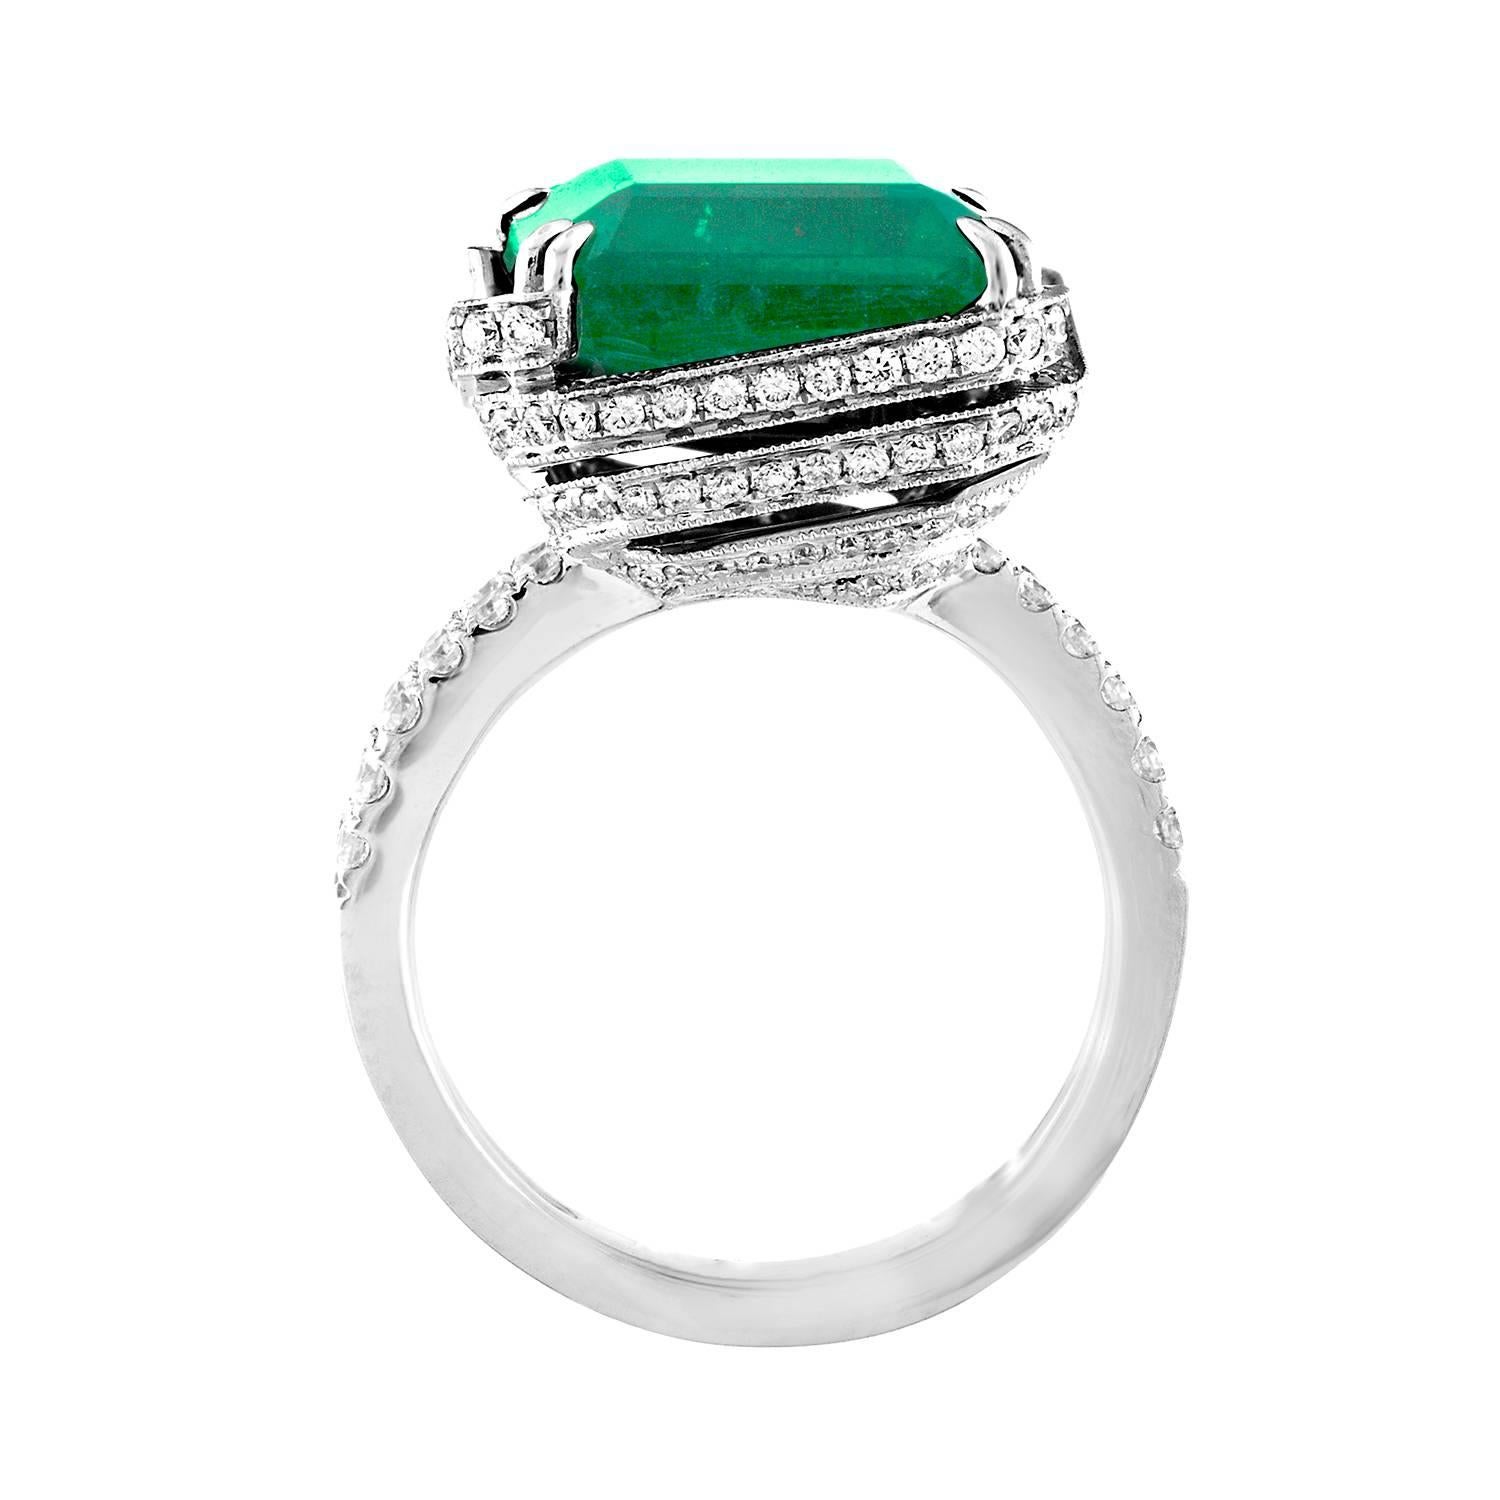 Twist on the classic Emerald Ring
The ring is 18K White Gold
The Emerald is 8.81 Carats Square Emerald Cut
The Emerald is AGL Certified Oil Treatment Only
The Emerald is From Brazil
There are 1.16 Carats in Diamonds F/G VS/SI
The ring is a size 6.5,